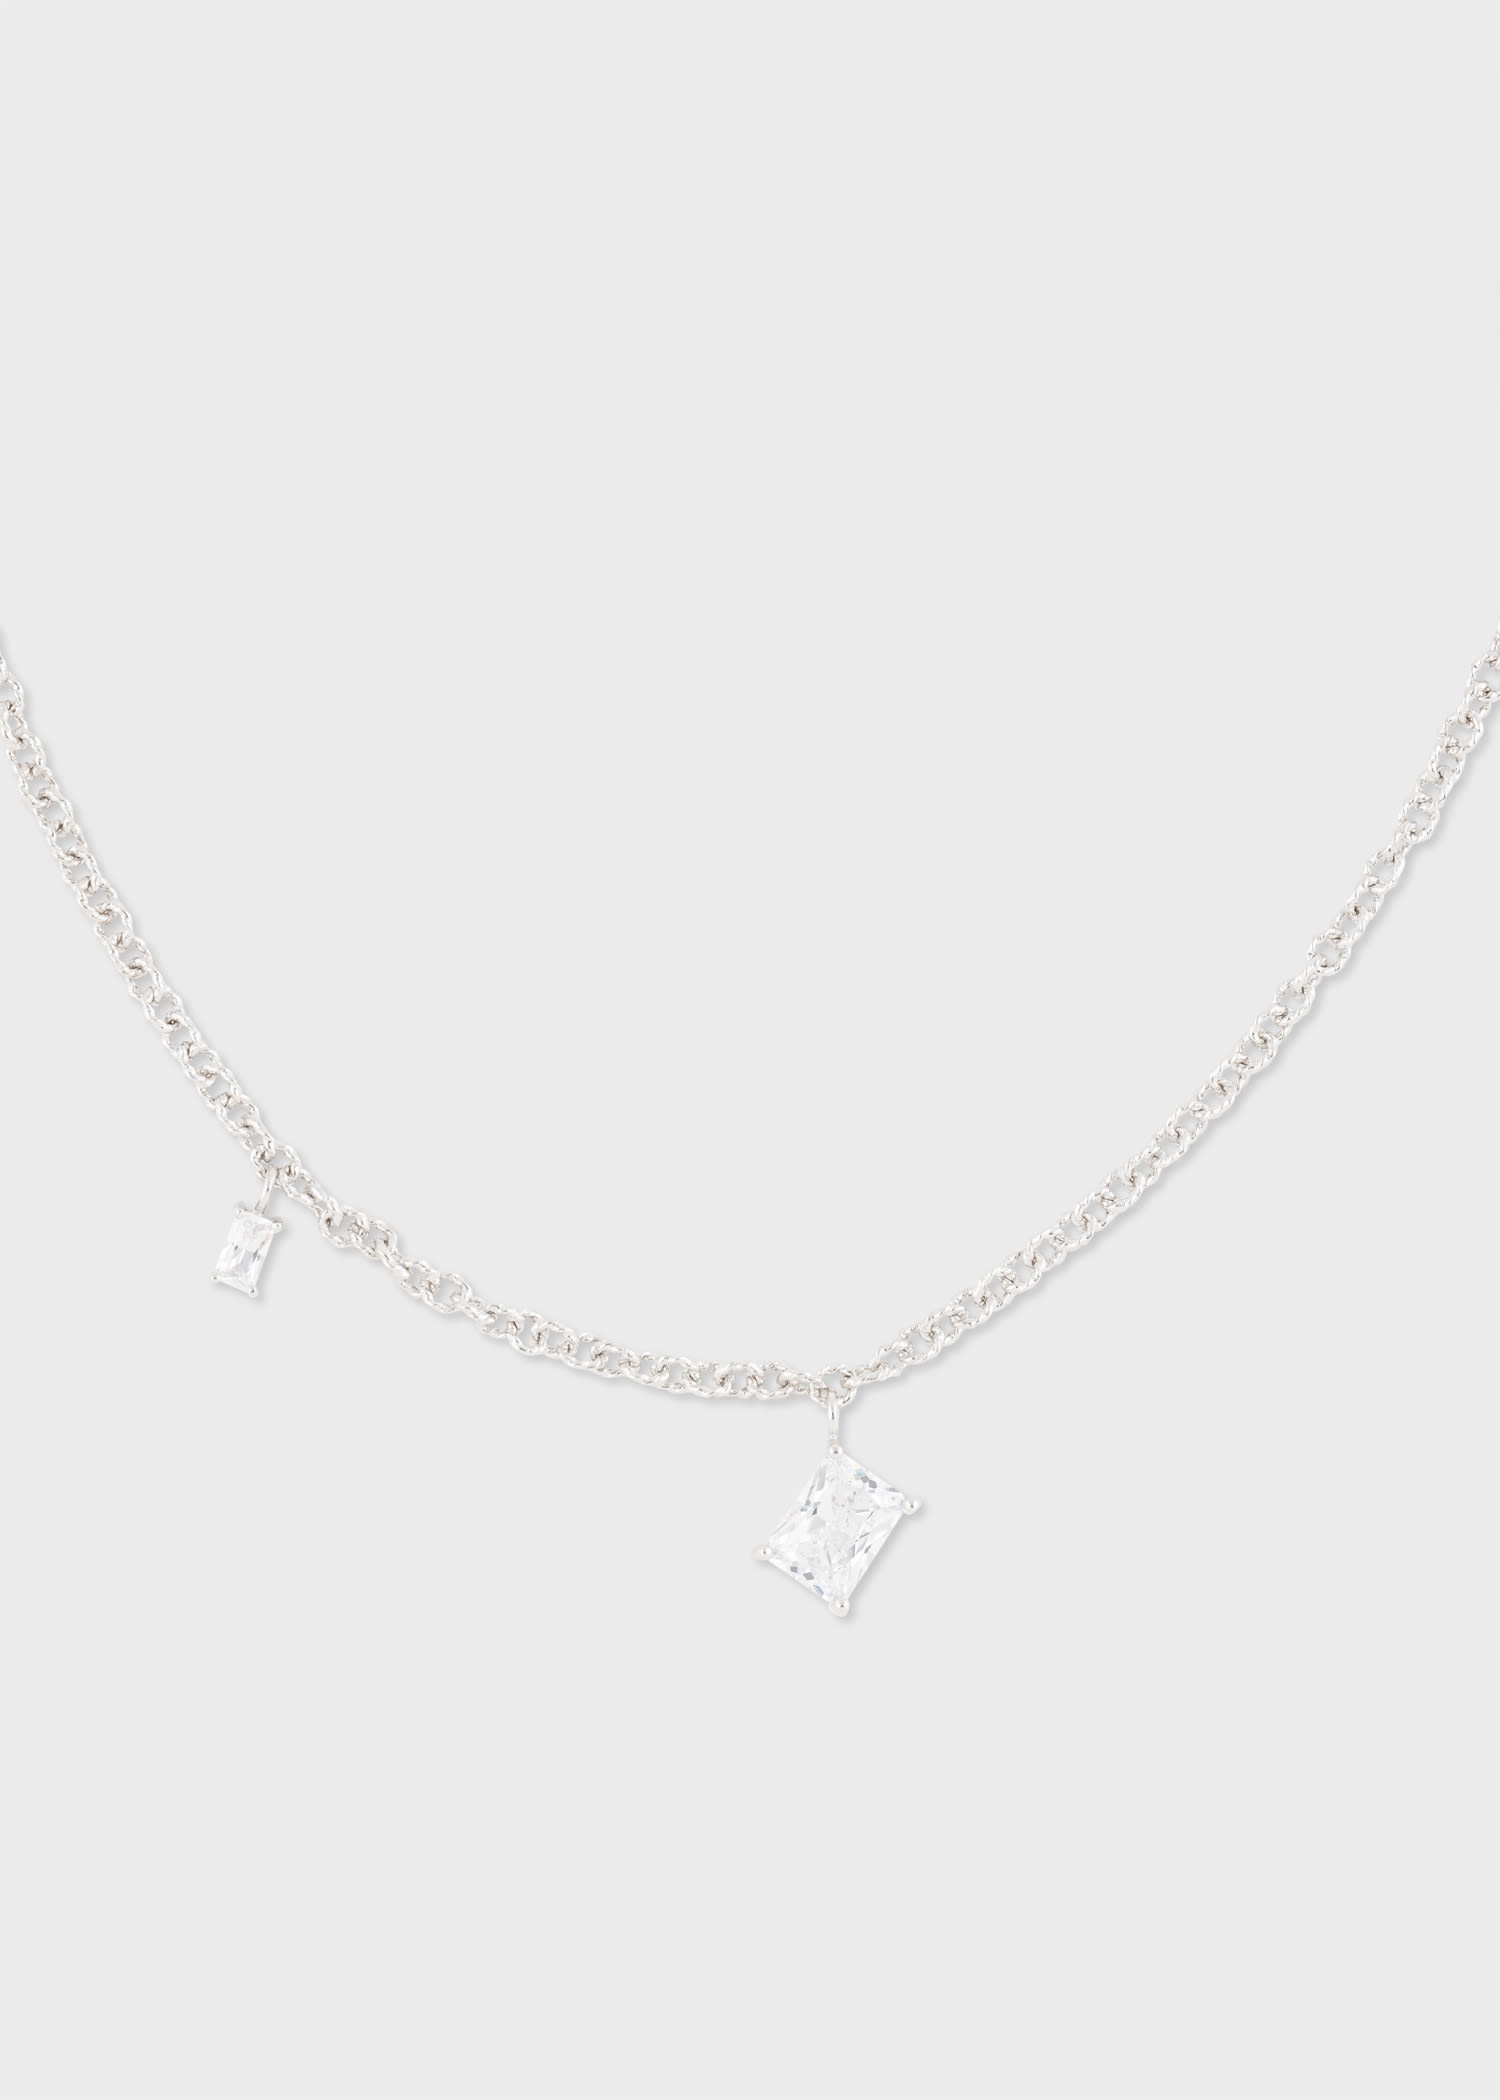 Cubic Zirconia and Rhodium Plated Necklace by Completedworks - 1